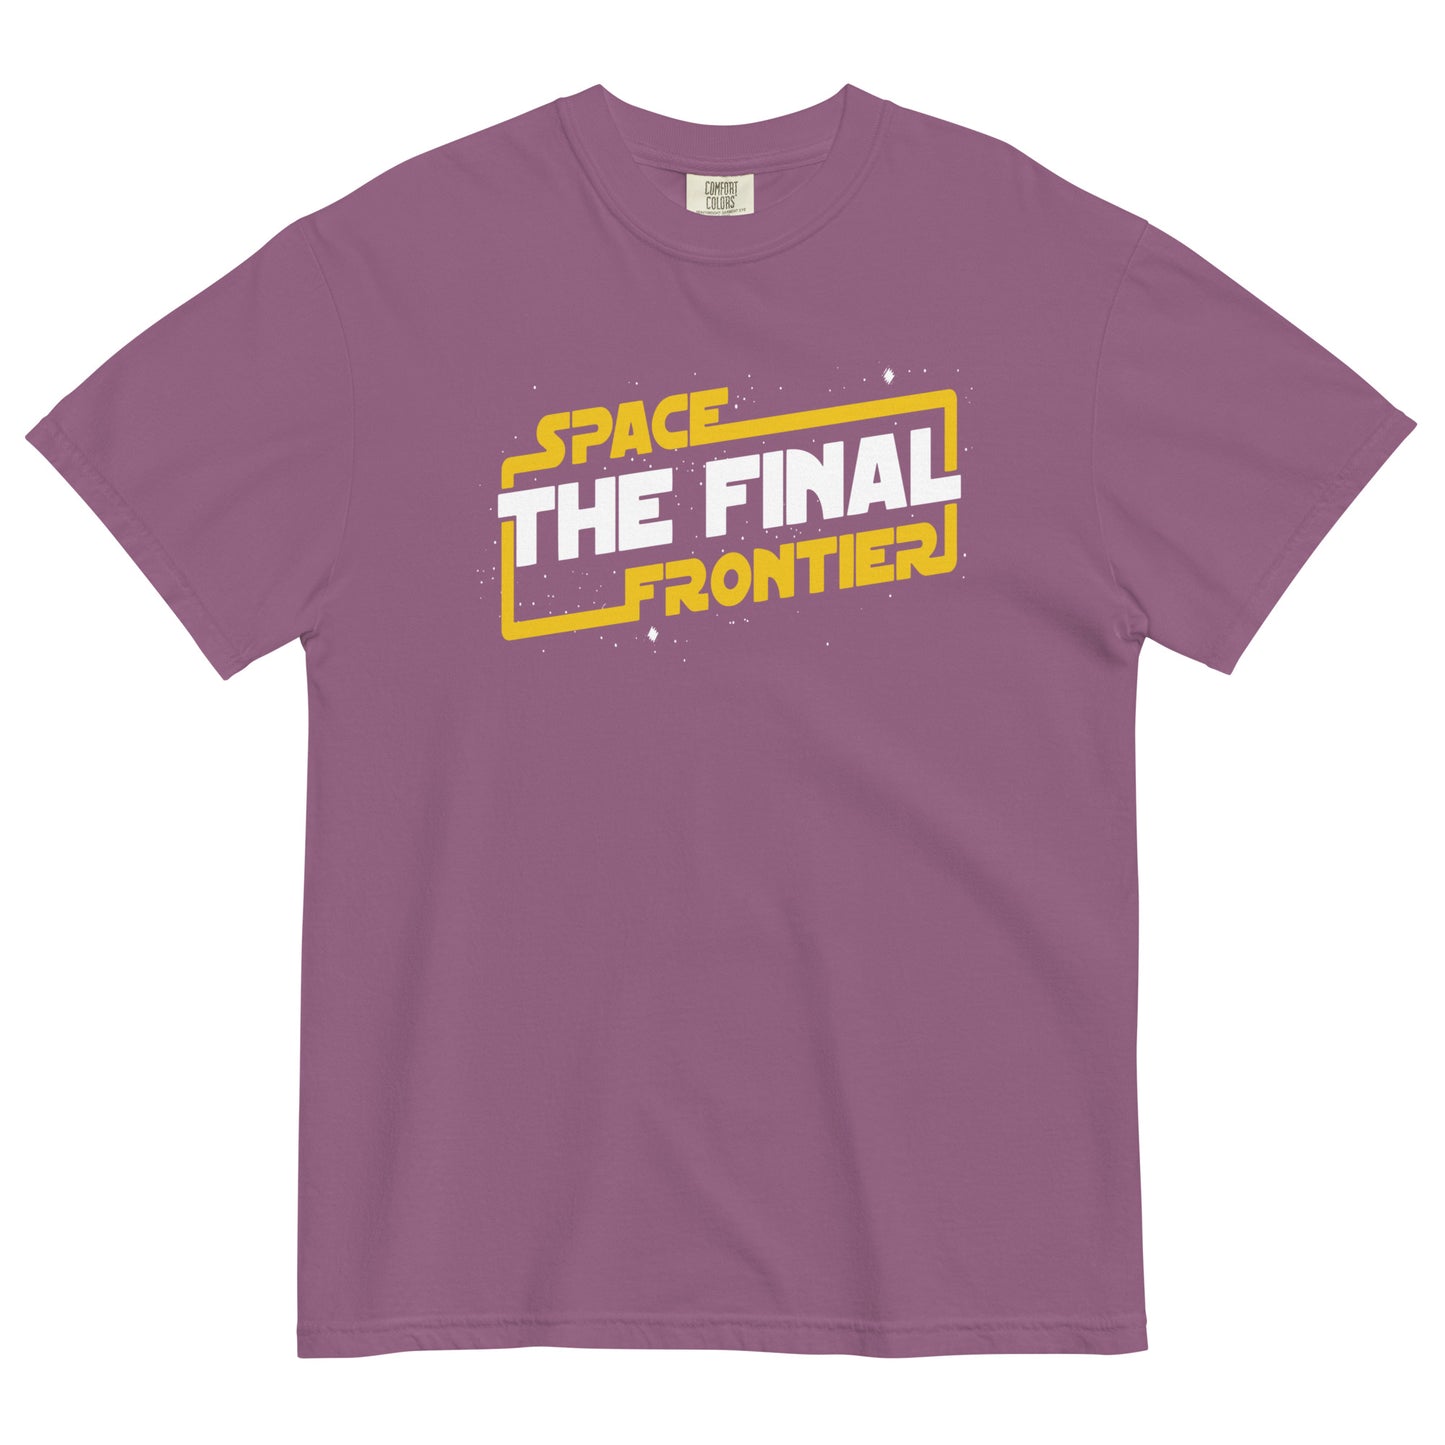 Space The Final Frontier Men's Relaxed Fit Tee